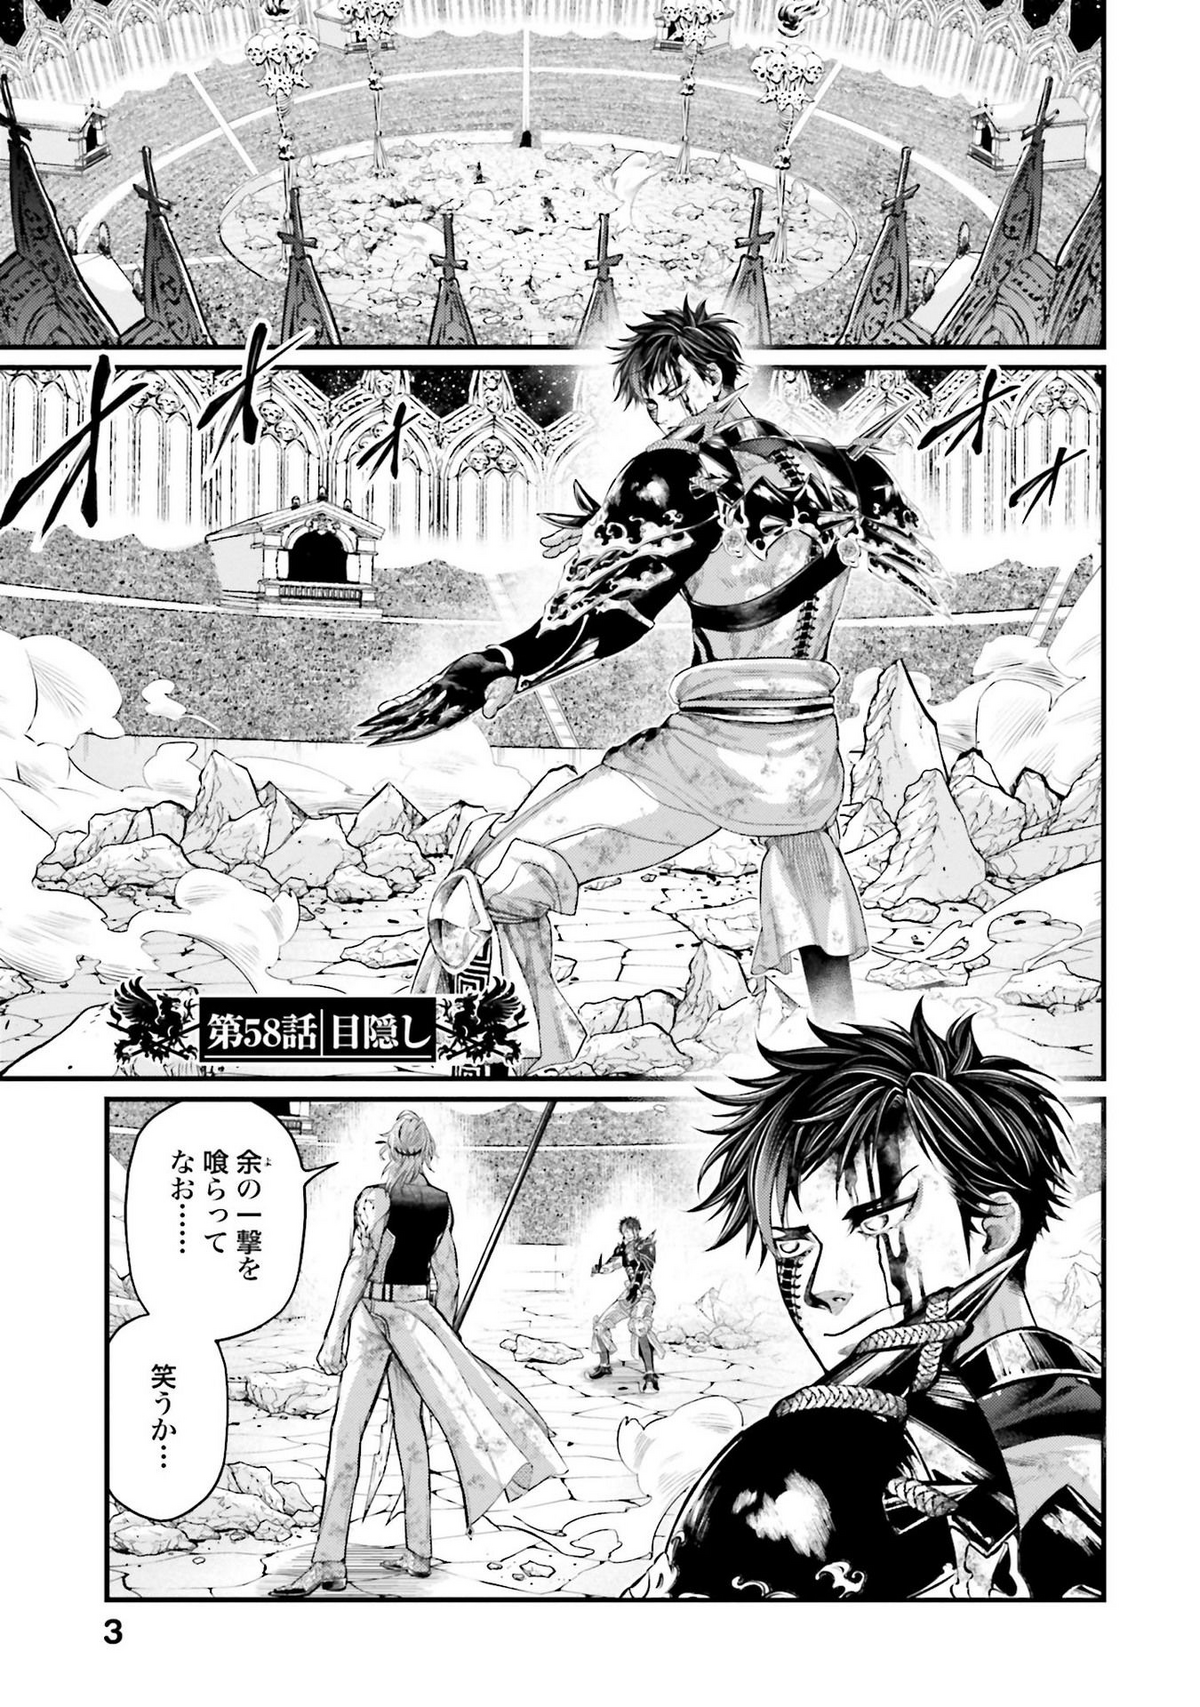 Record Of Ragnarok Ch 77 Spoilers For Chapter 77 Of Record Of Ragnarok ⚠️ The, 48% OFF